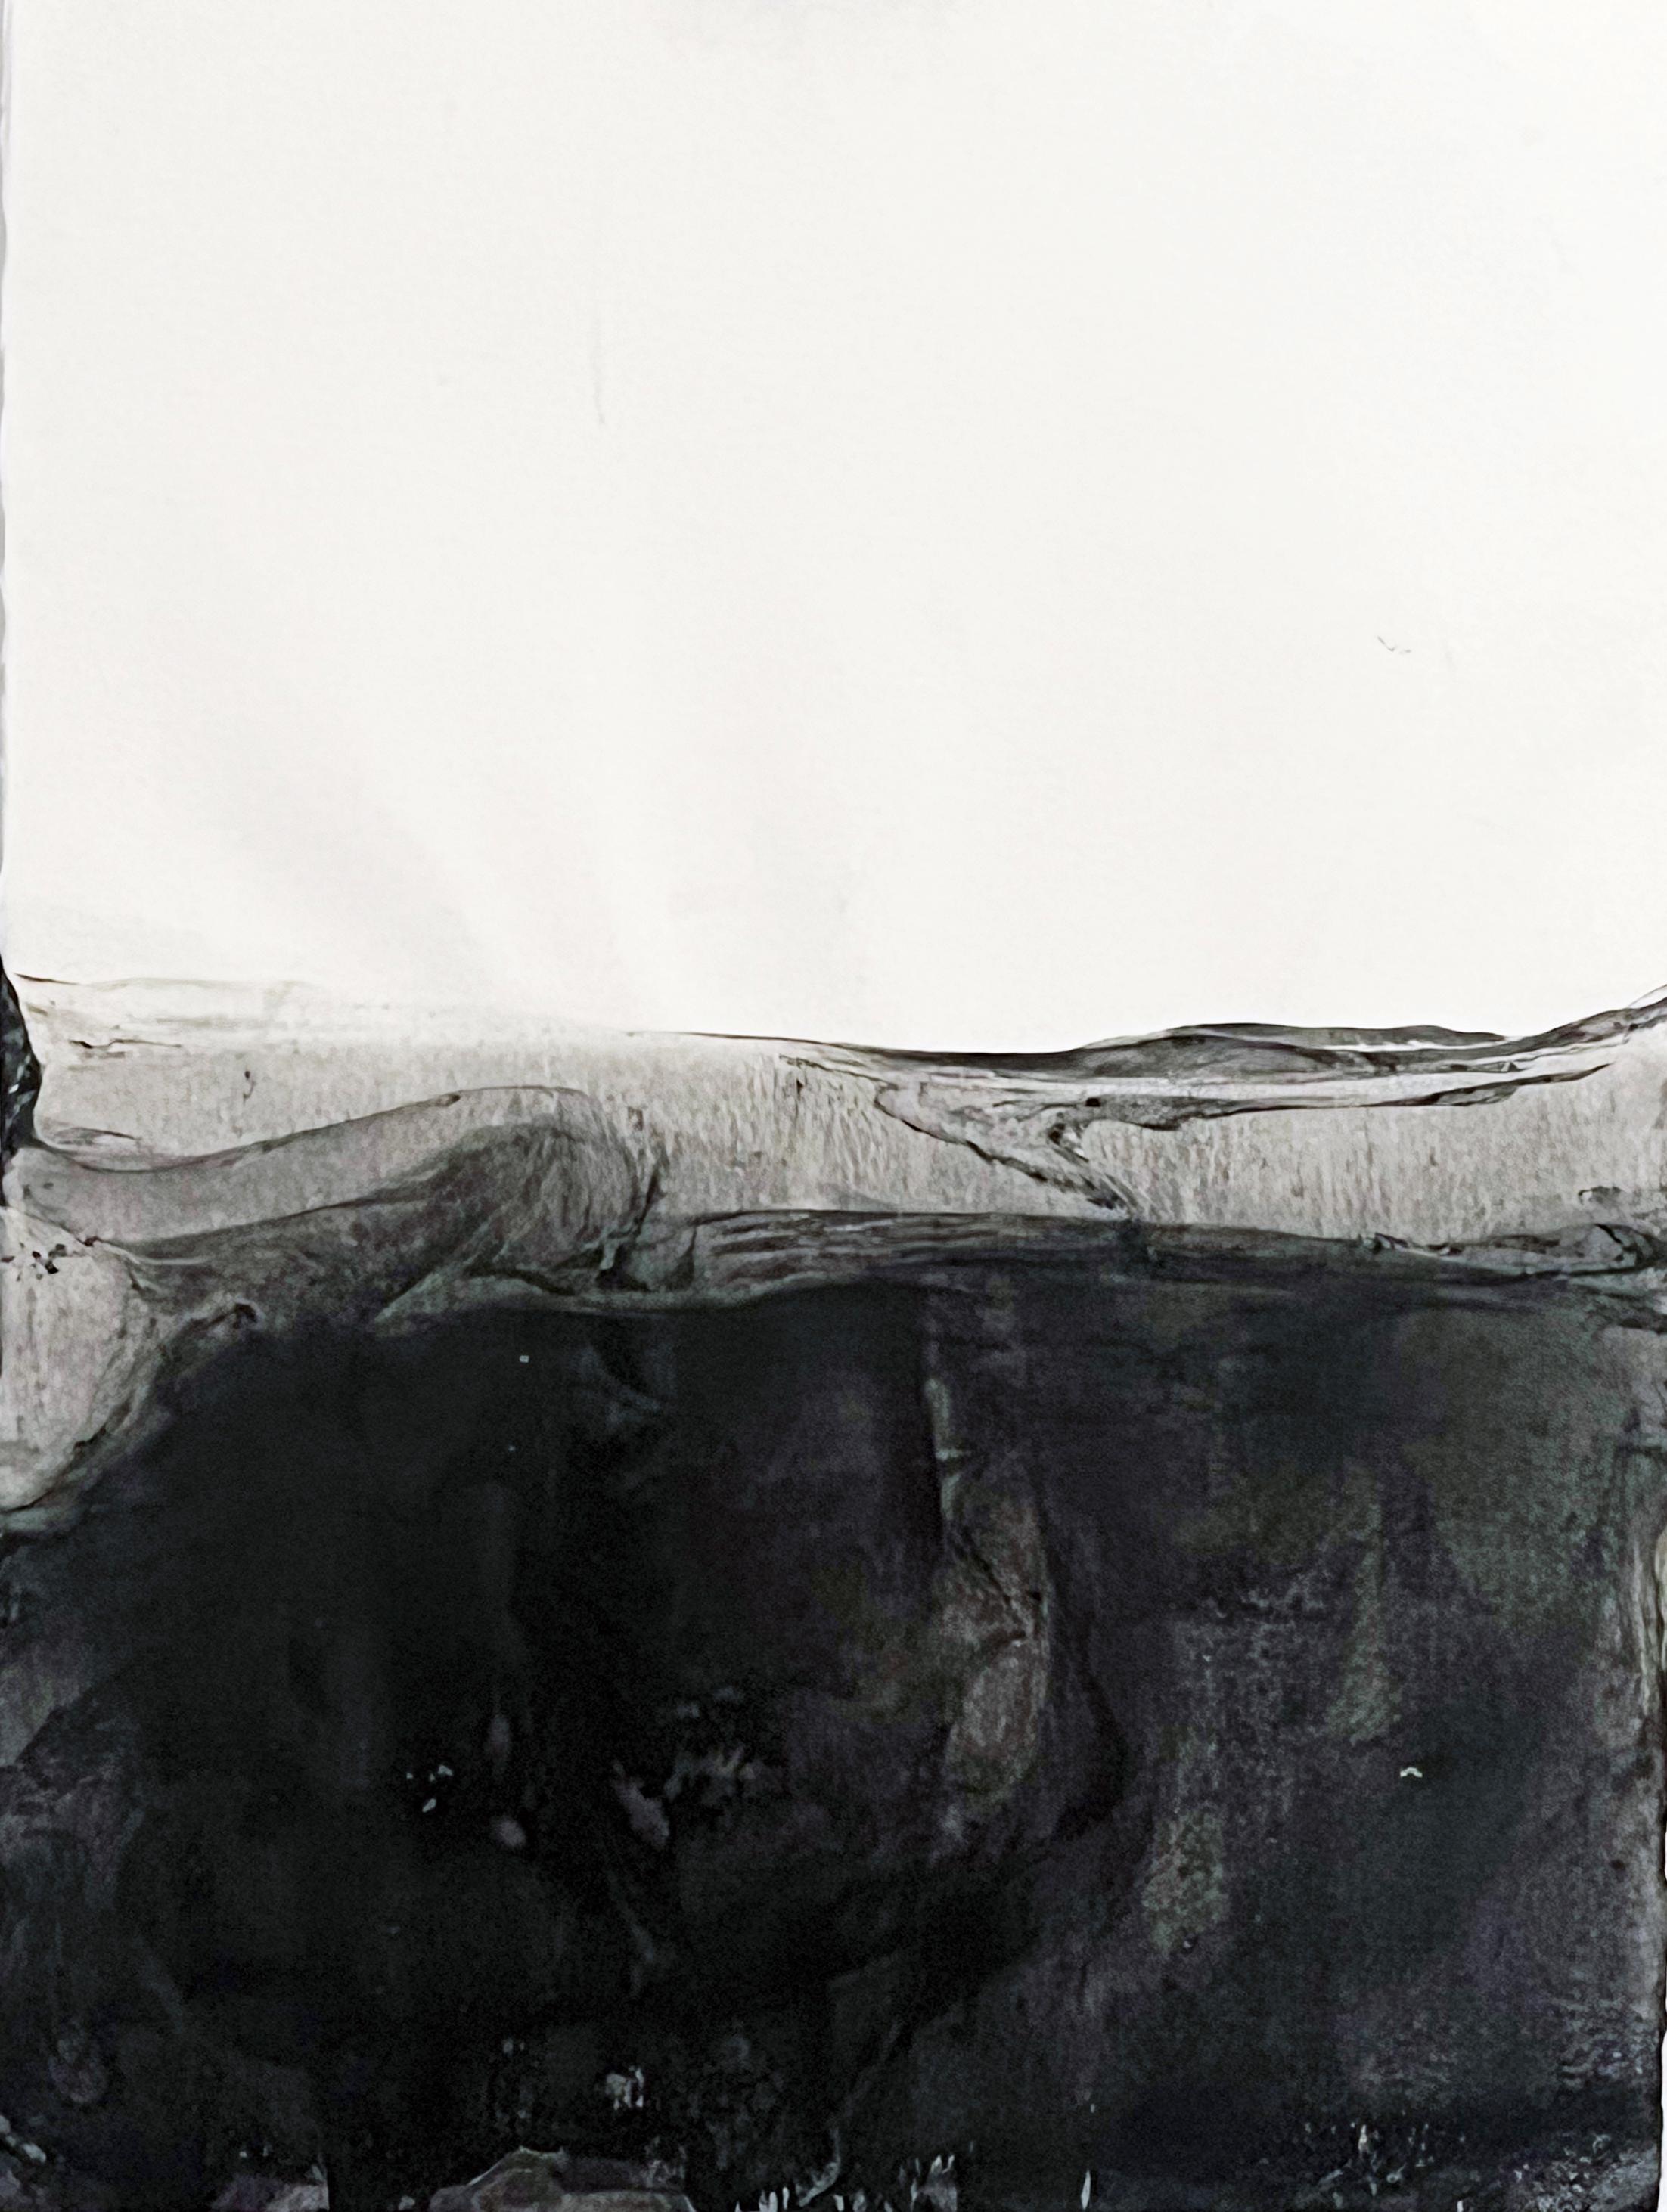 Marilina Marchica Abstract Drawing - Landscape Black and White - Original Paint - Large Size Made in Italy